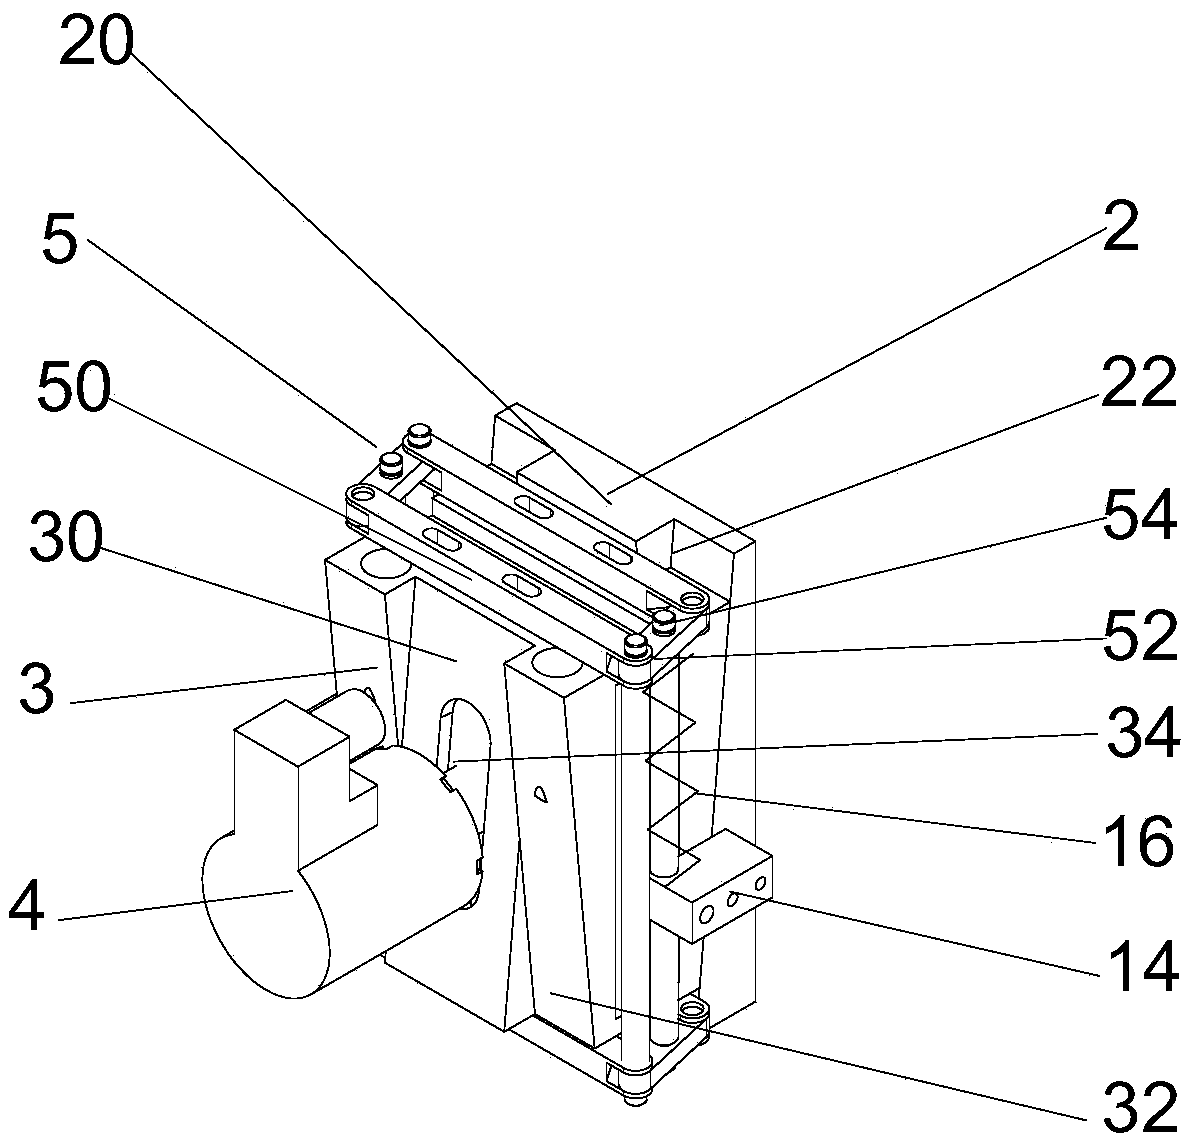 Anti-unexpected movement elevator control device and method